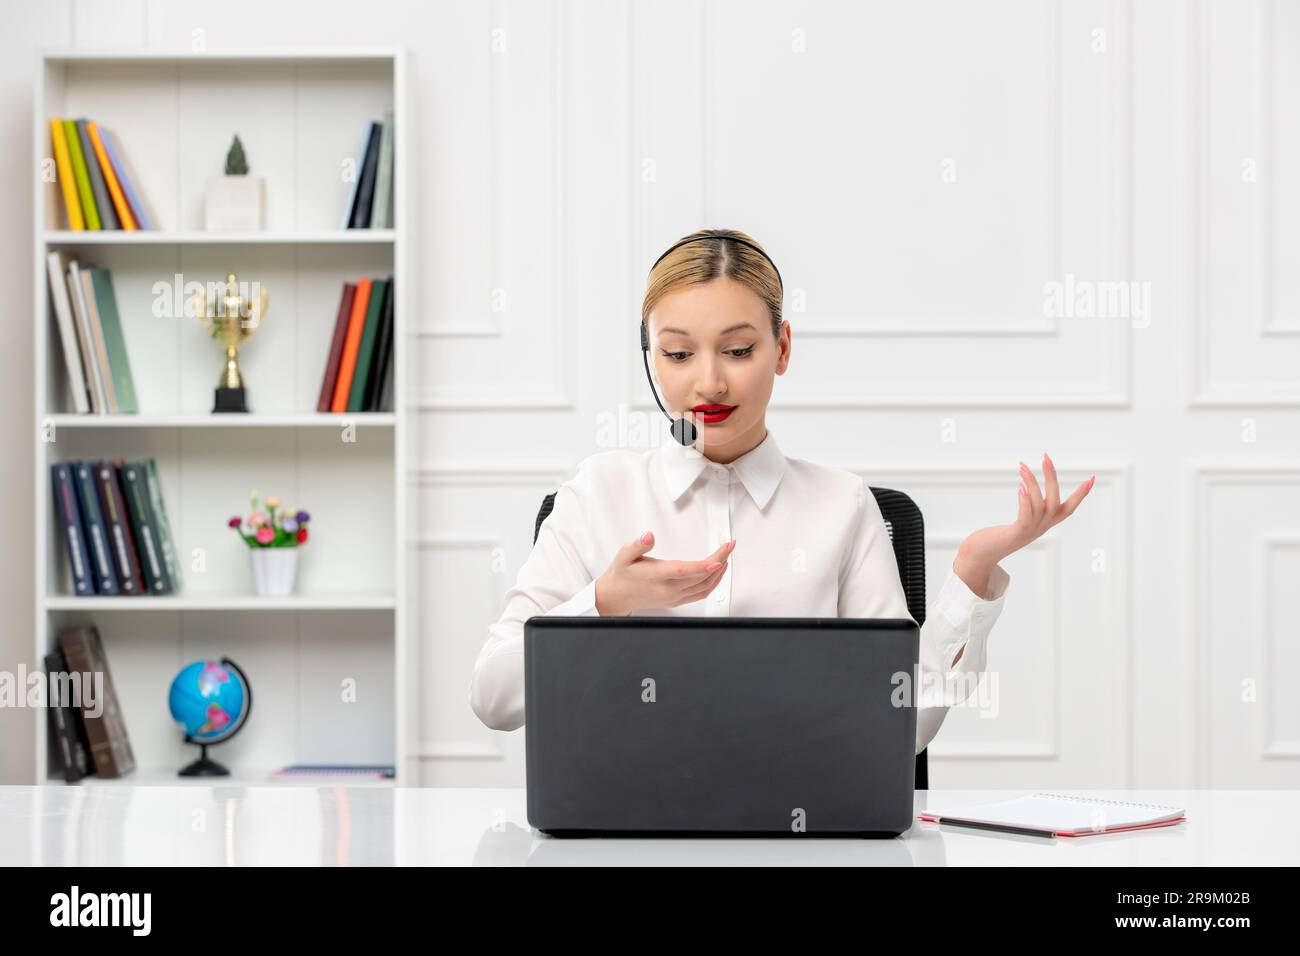 customer service cute woman in white shirt with headset and computer talking and waving hands Stock Photo